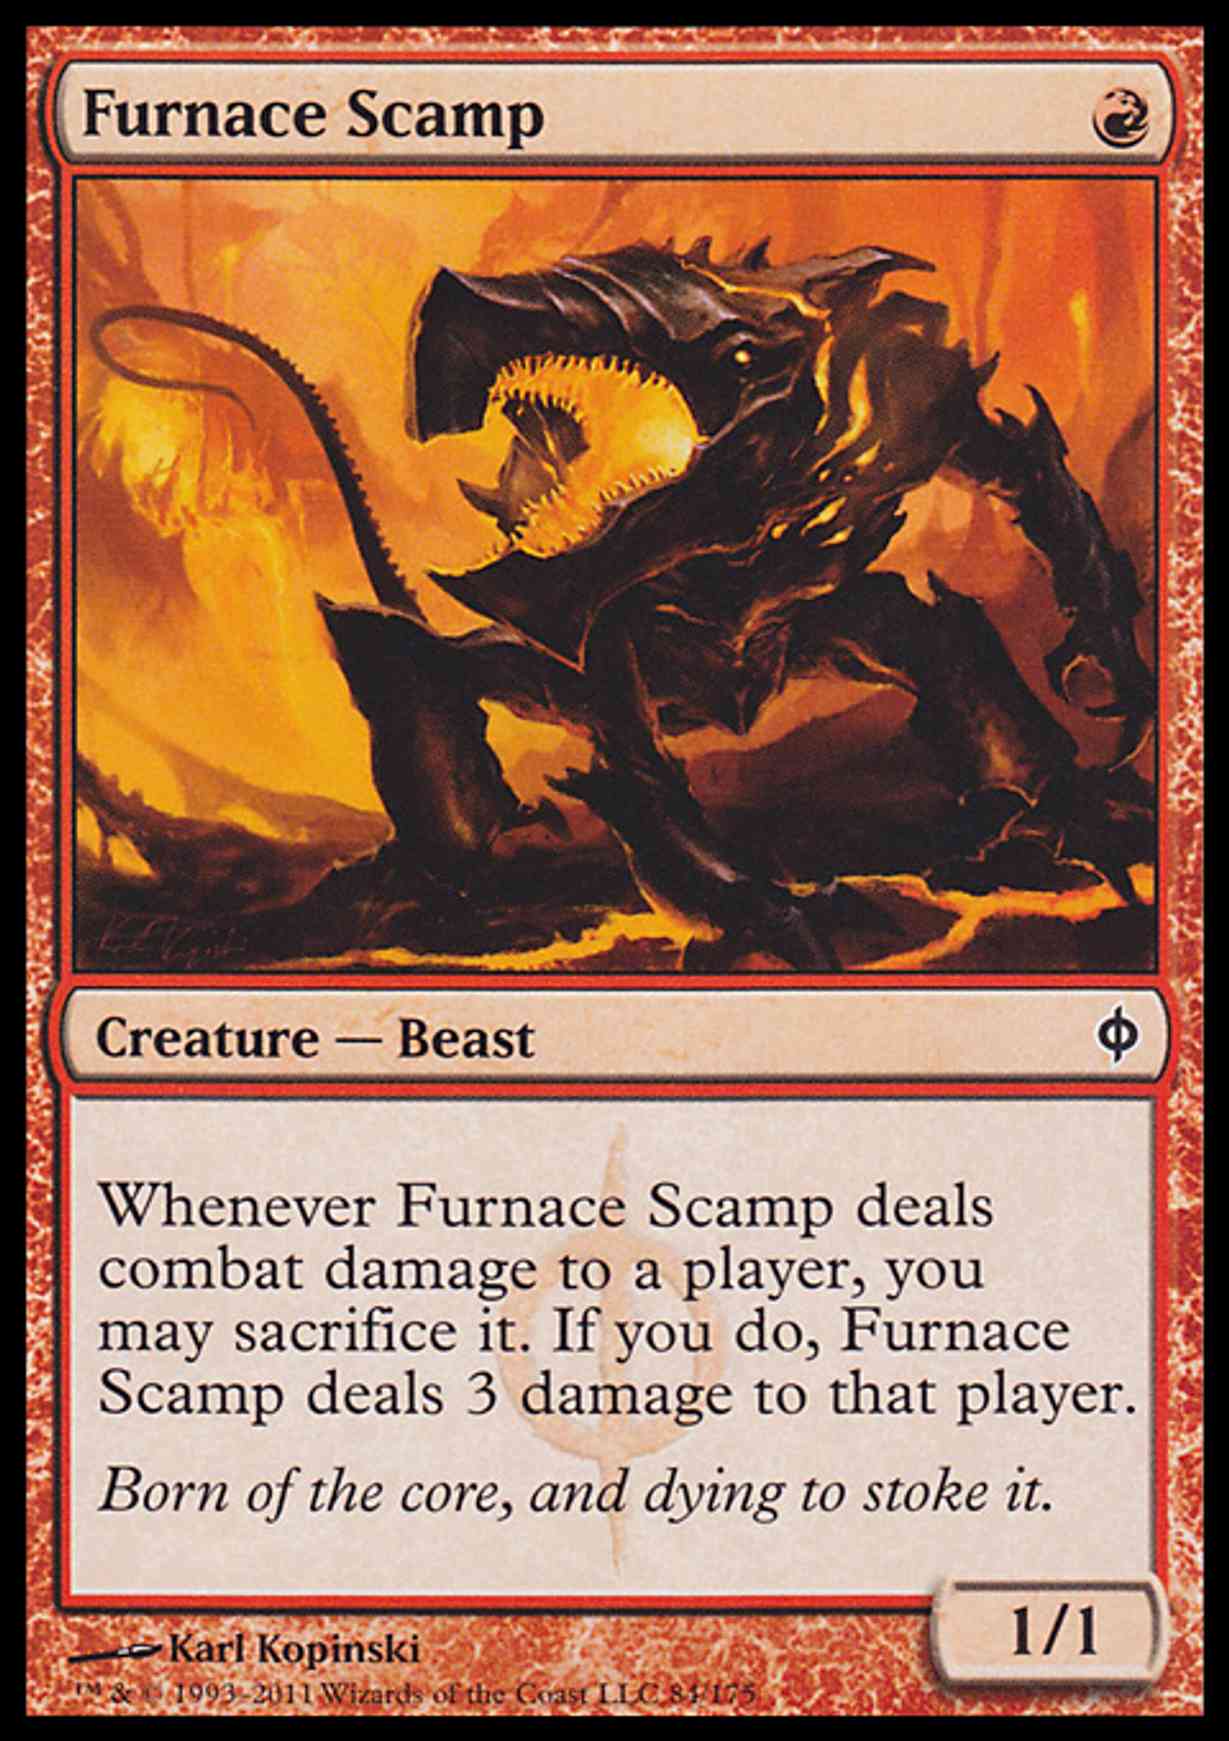 Furnace Scamp magic card front